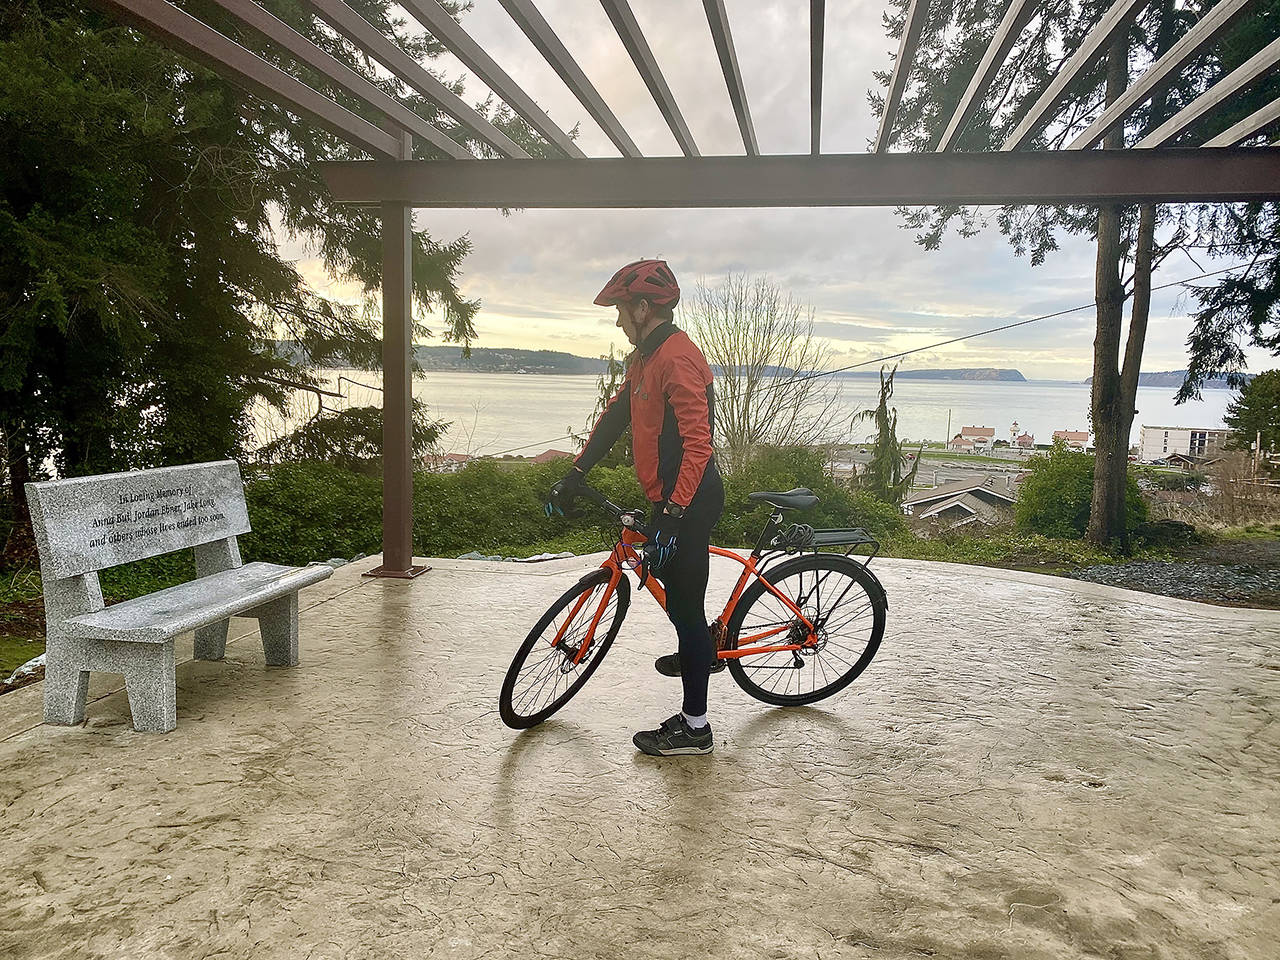 David Culler takes a break from a bike ride at Byers Family Park, also known as Peace Park, that offers a scenic overlook of the Mukilteo waterfront. (Andrea Brown / The Herald)